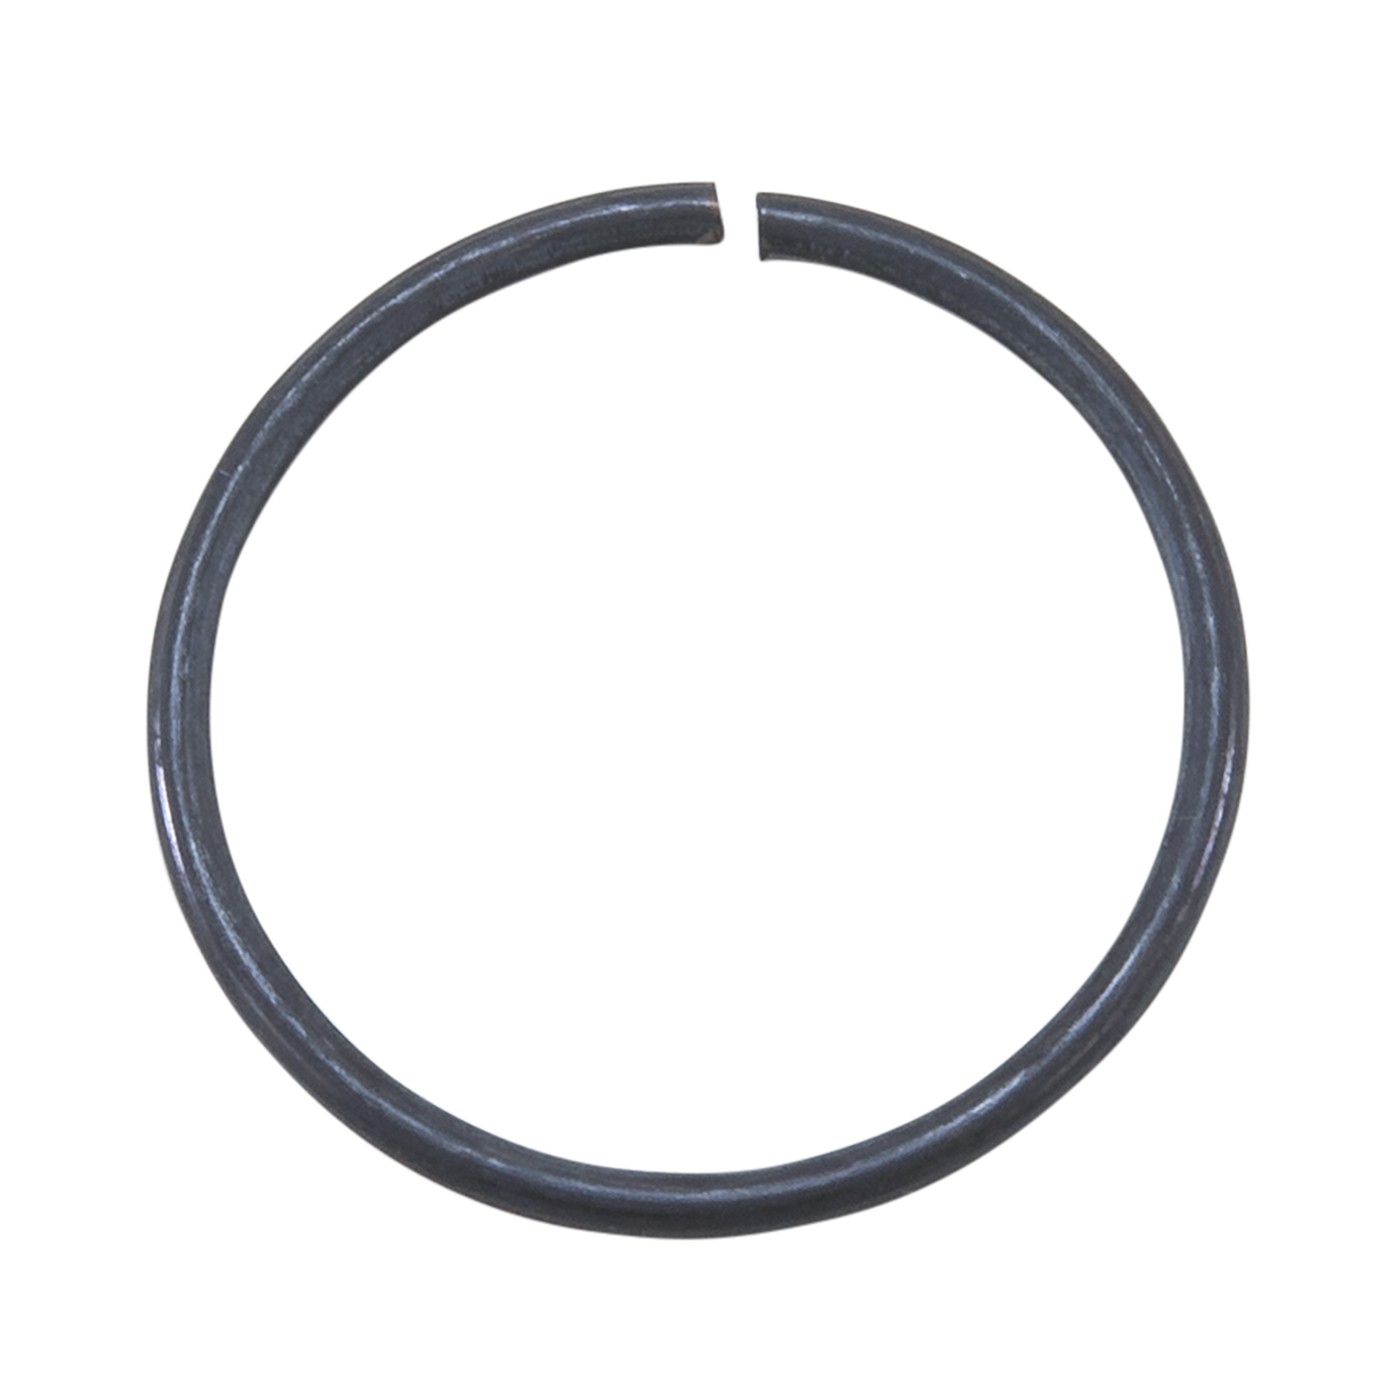 GM 9.25" IFS snap ring for outer stub. 